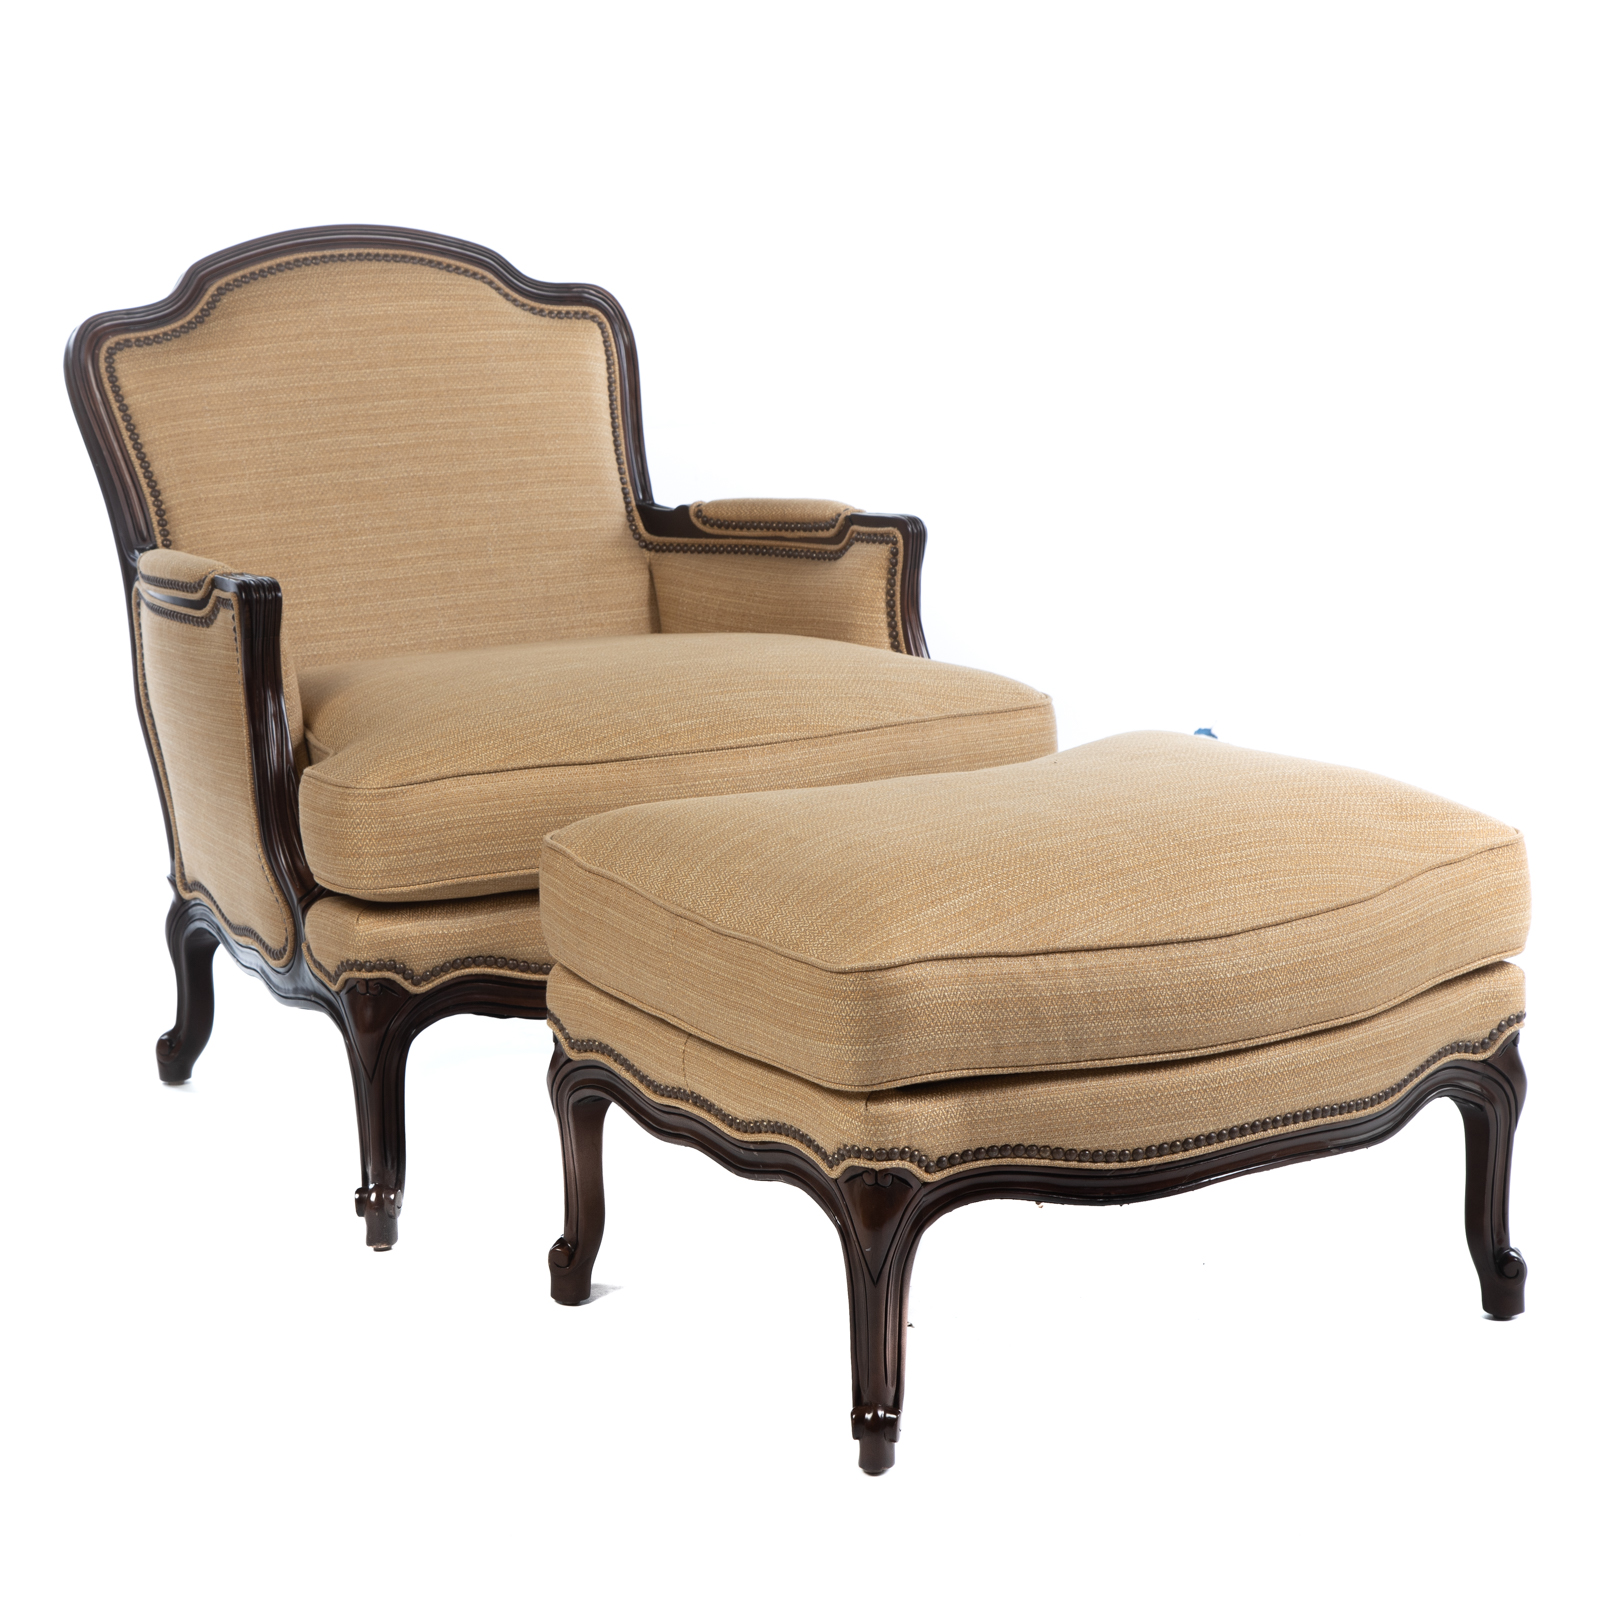 LOUIS XV STYLE UPHOLSTERED CHAIR